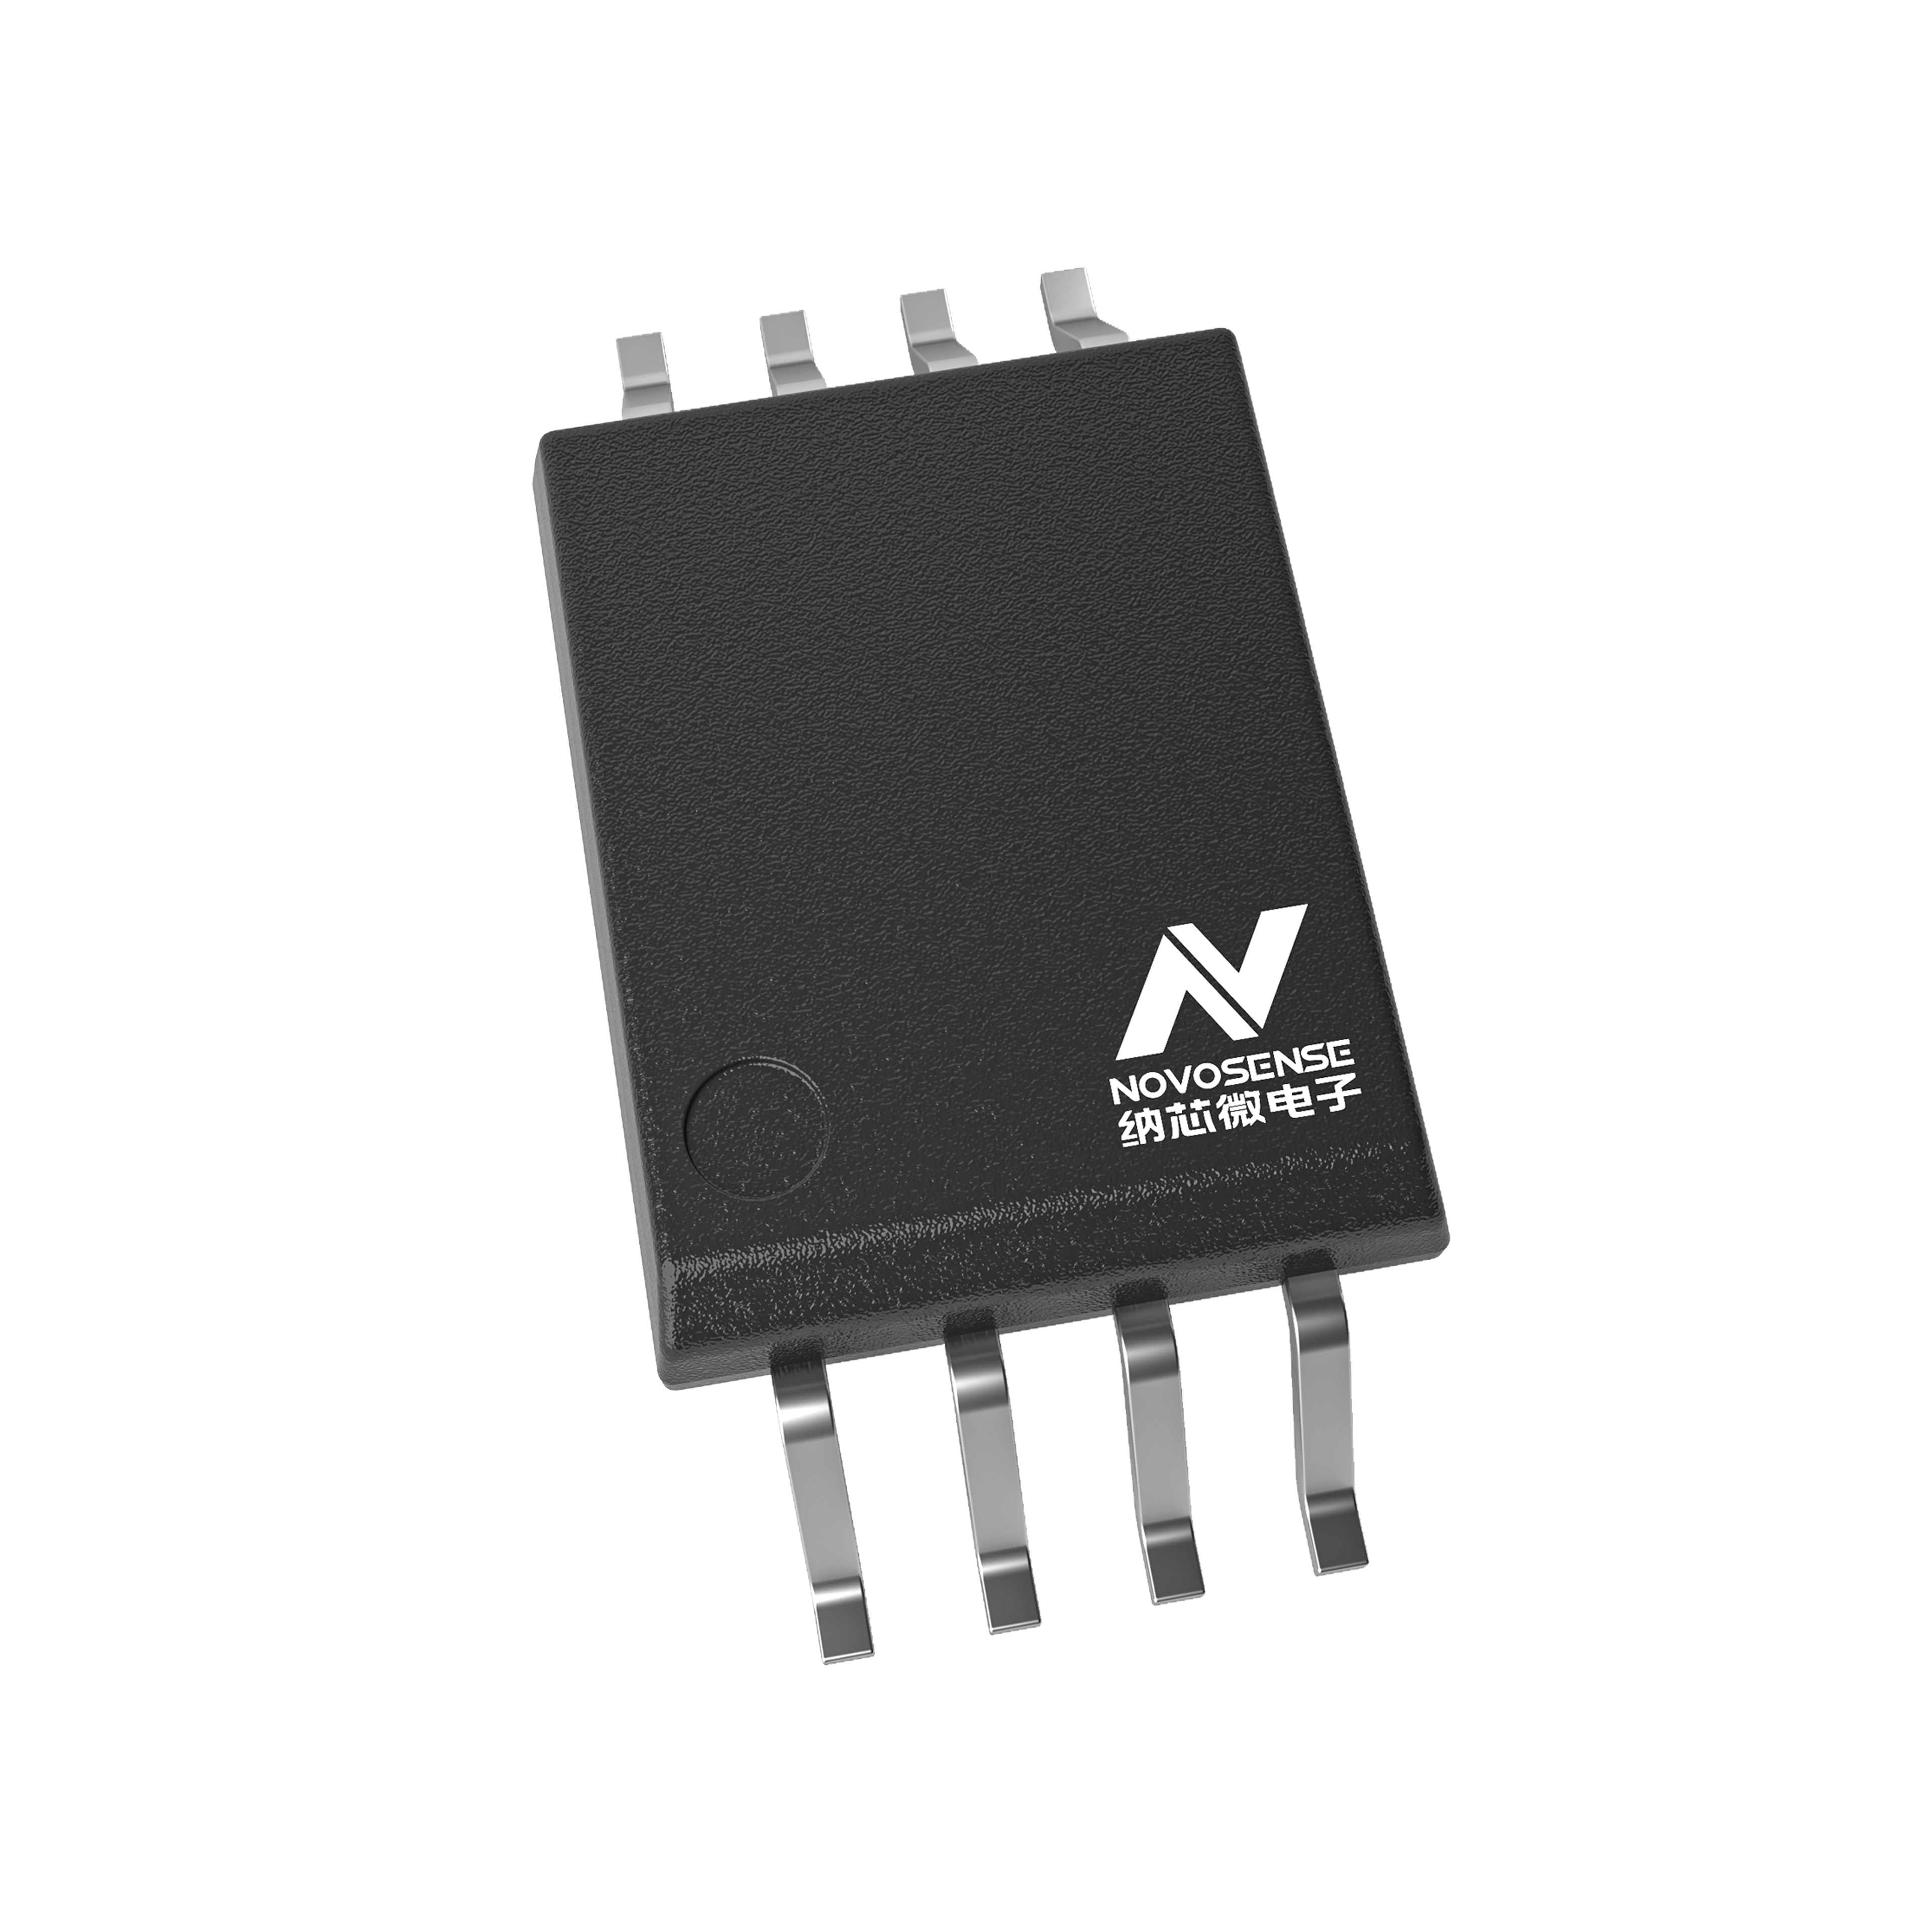 【NSI8221W0-DSWVR】HIGH RELIABILITY DUAL-CHANNEL RE